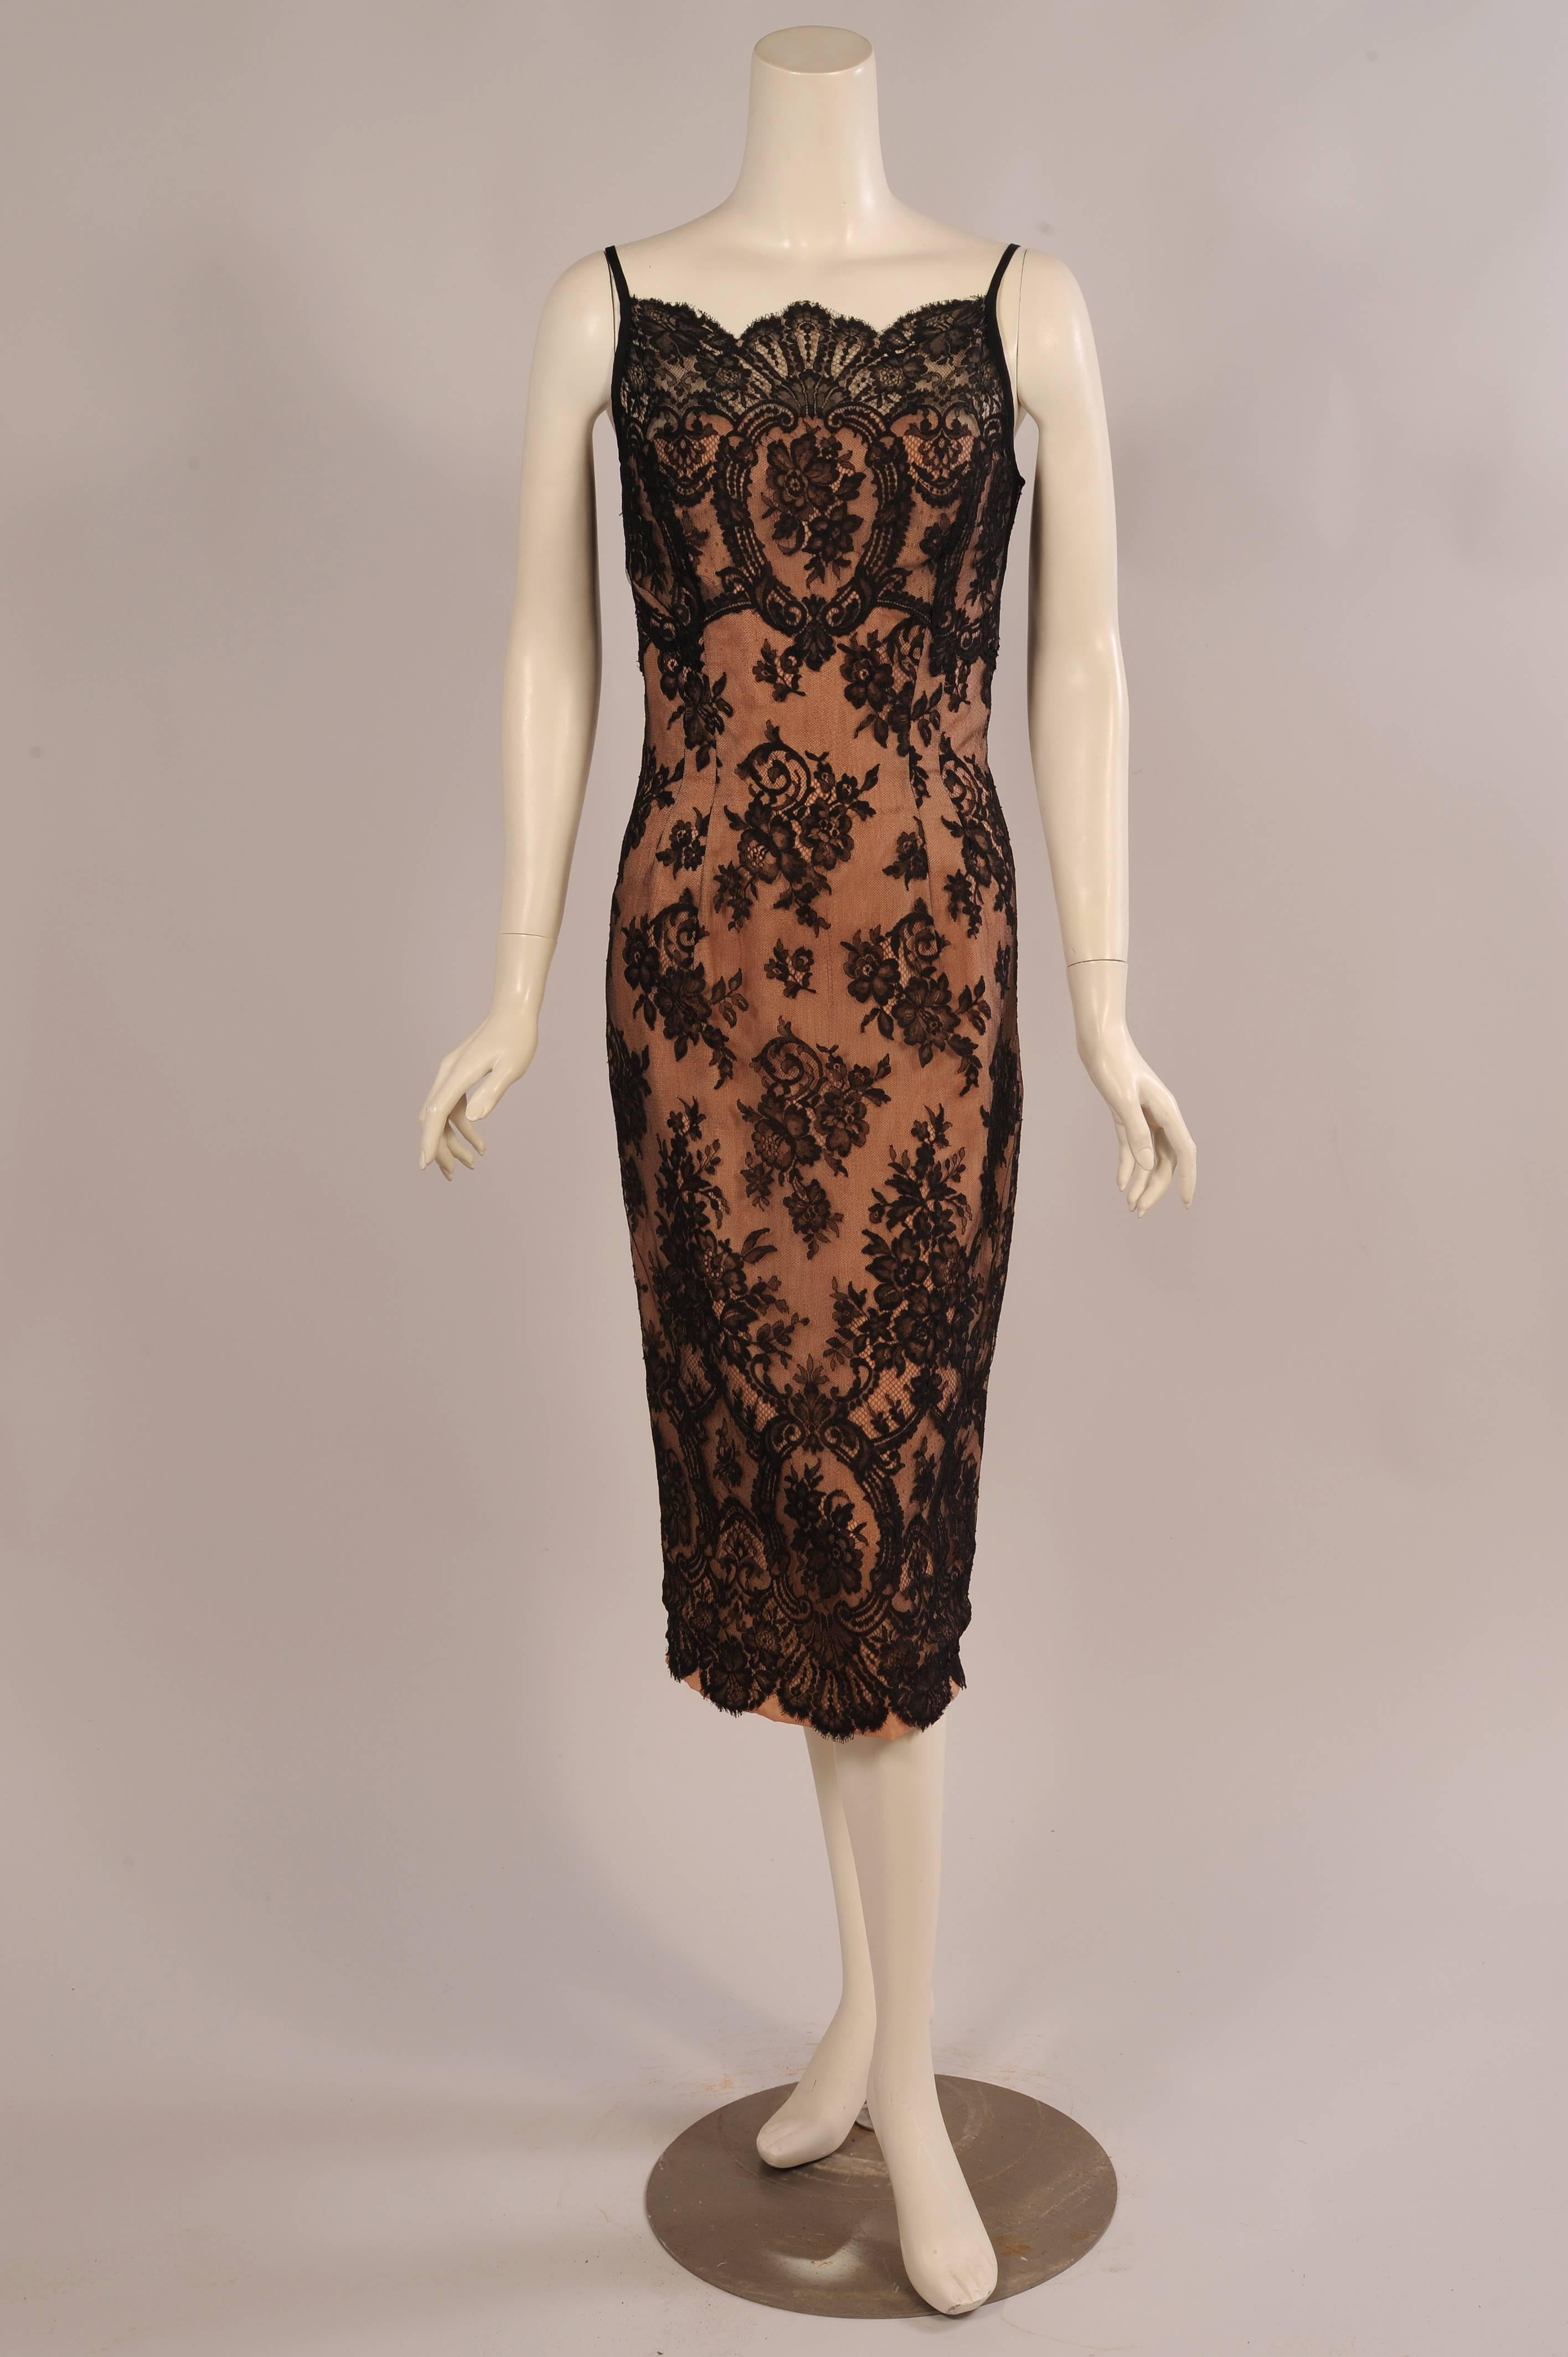 Gorgeous black lace over nude net and faille combines for this glamorous cocktail dress from Ceil Chapman. There are narrow black straps, a scalloped lace edge on the bodice and it is fitted through the torso. The skirt is narrow and the lace is